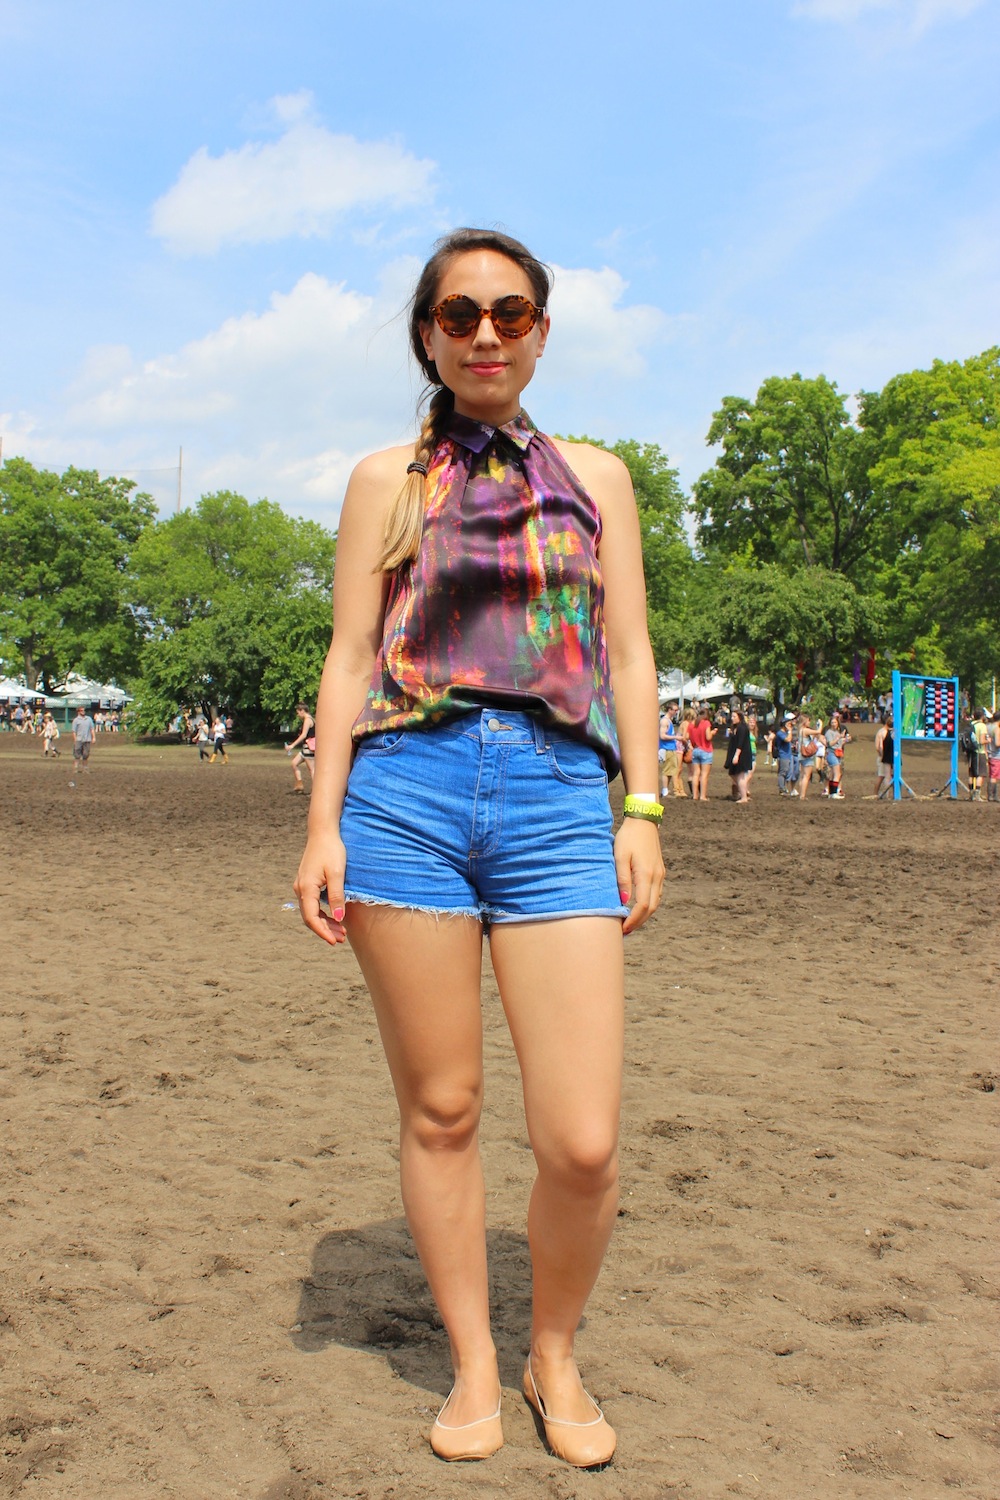 Corinne from London UK at Governors Ball 2013 Style